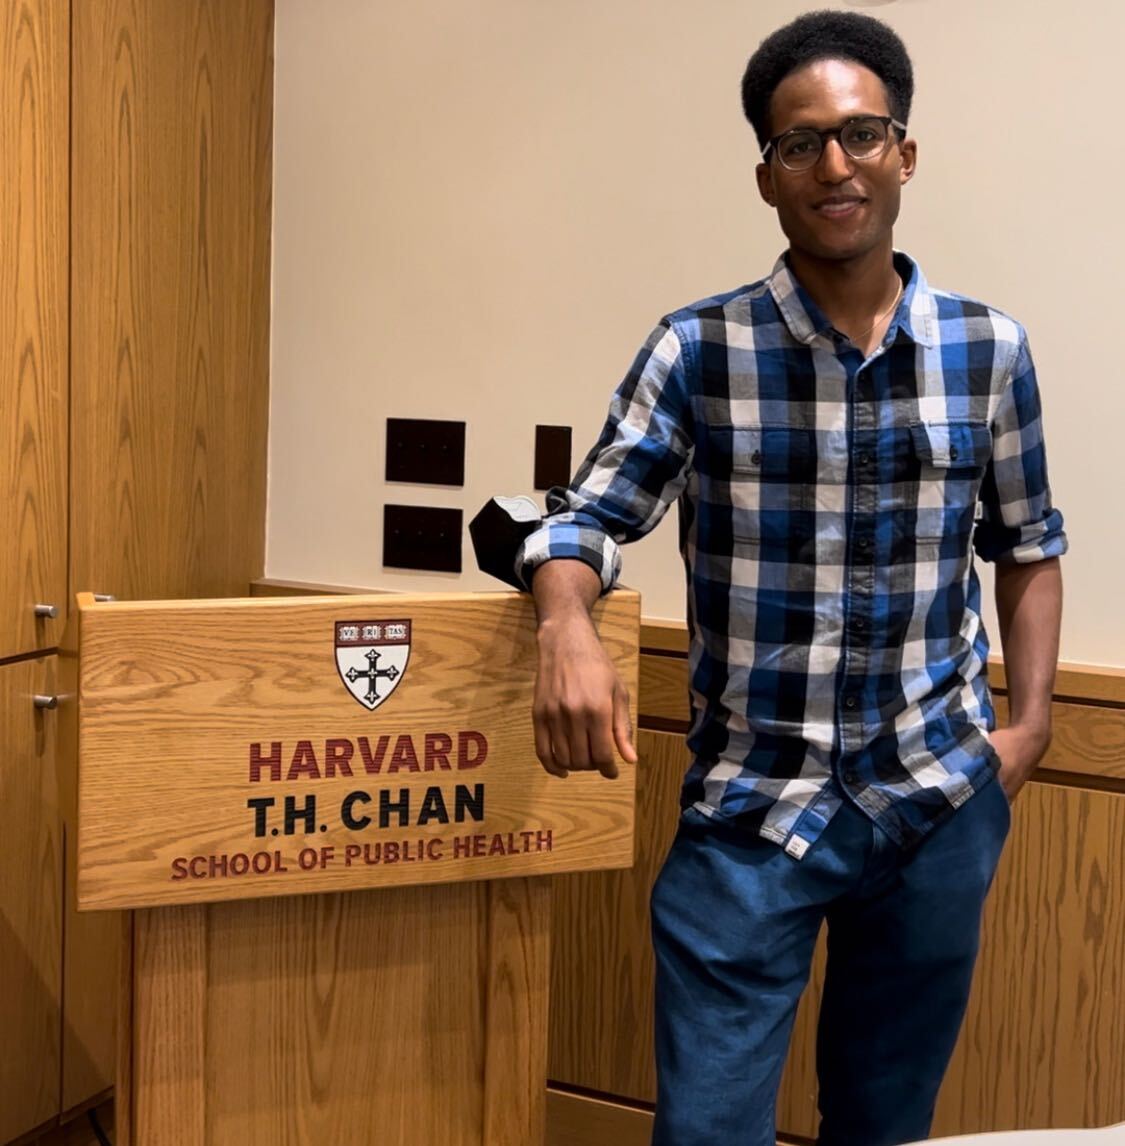 Spencer stands to the right of the frame, smiling at the camera. He is standing next to the podium showing the words "Harvard T.H. Chan School of Public Health"